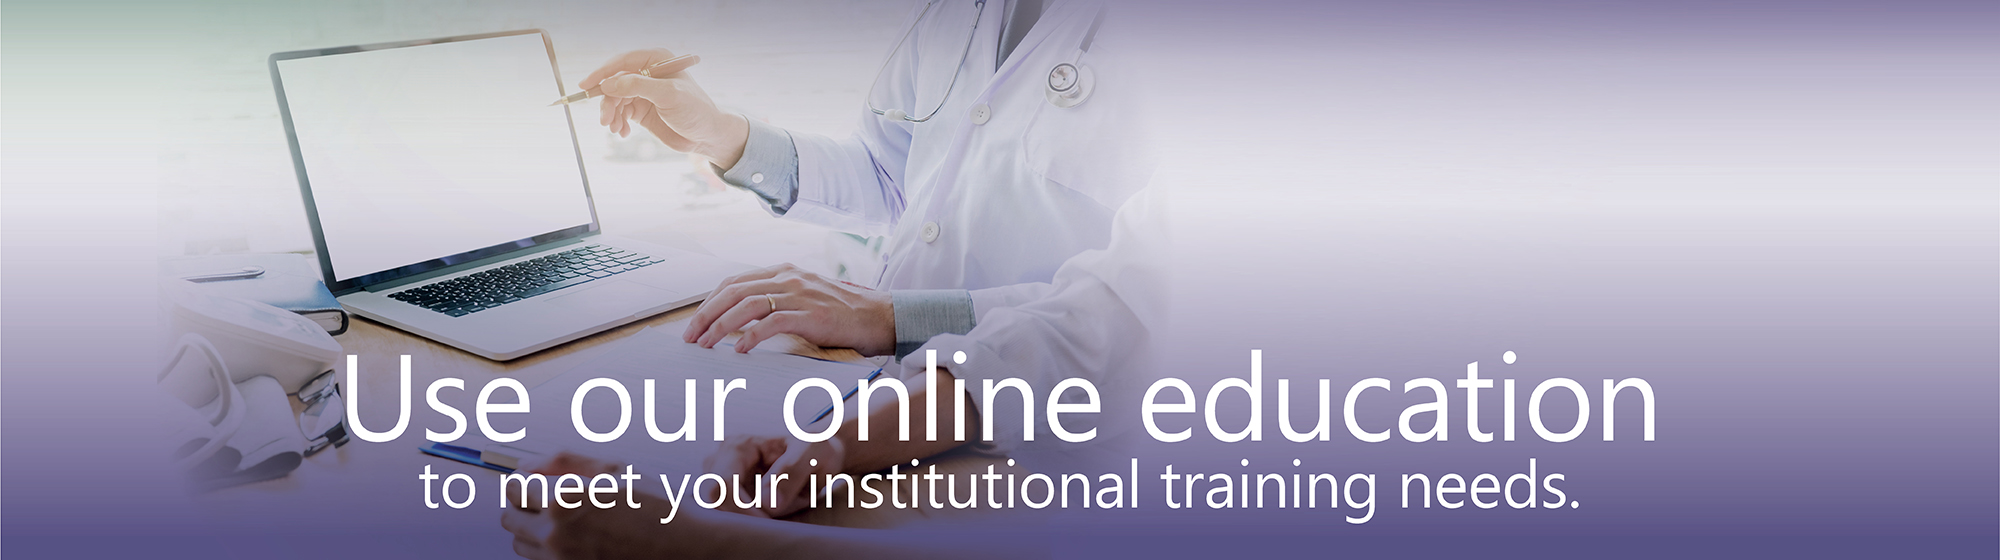 Use our online education to meet your institutional training needs